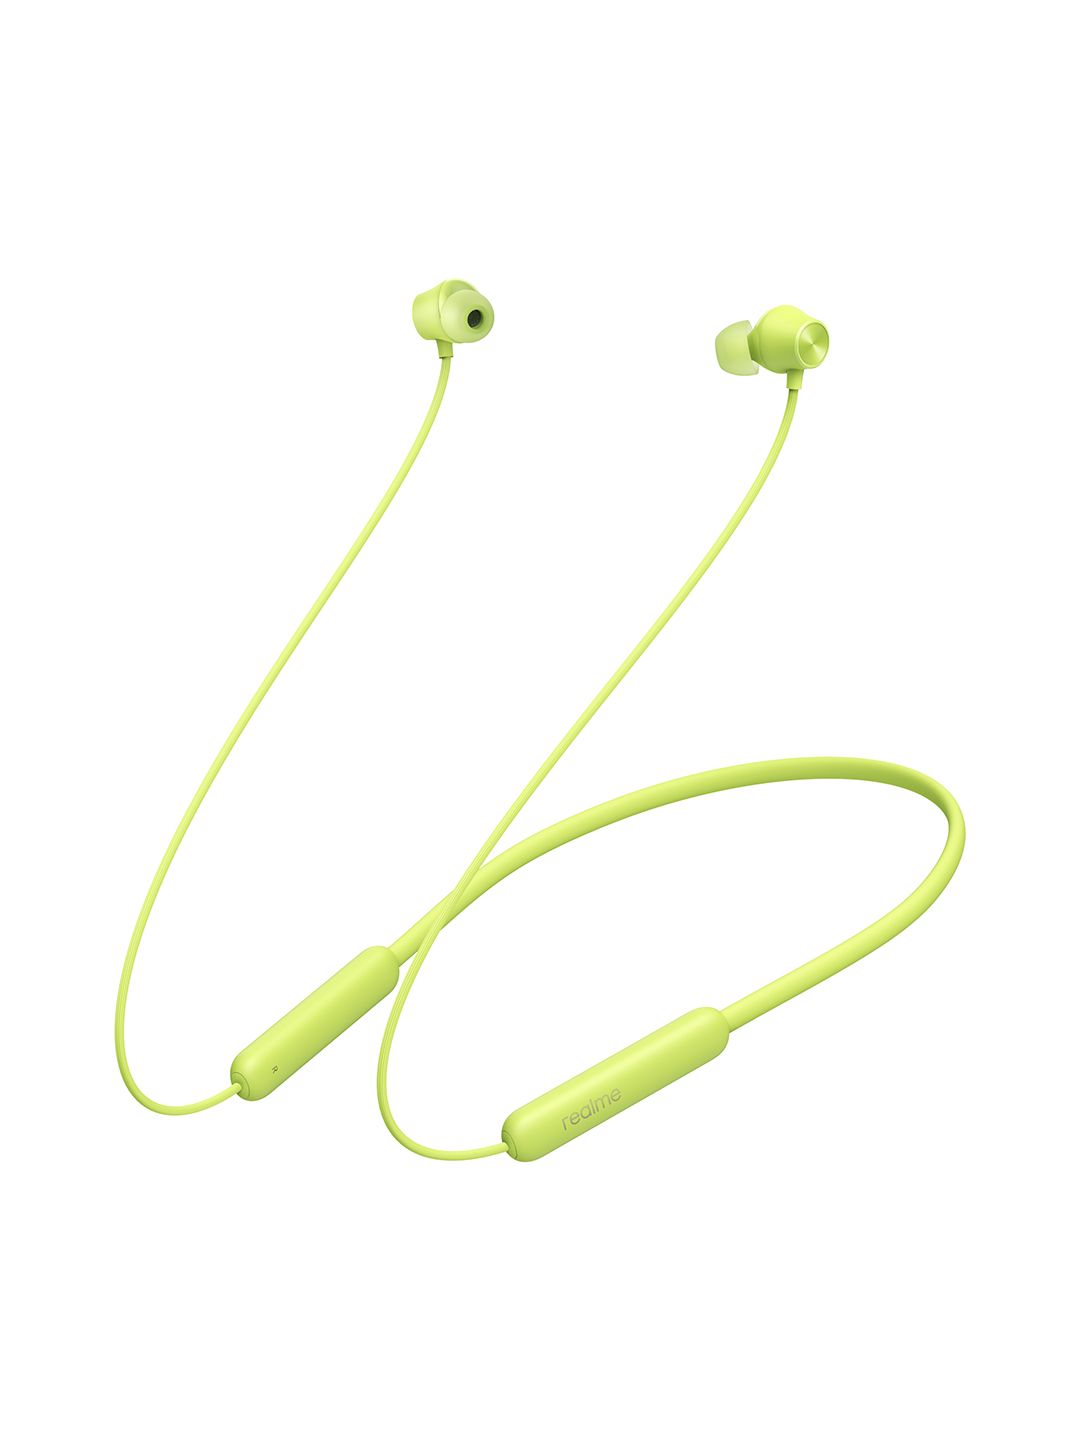 realme Green Buds Wireless 2 Neo Bluetooth Headphones Price in India